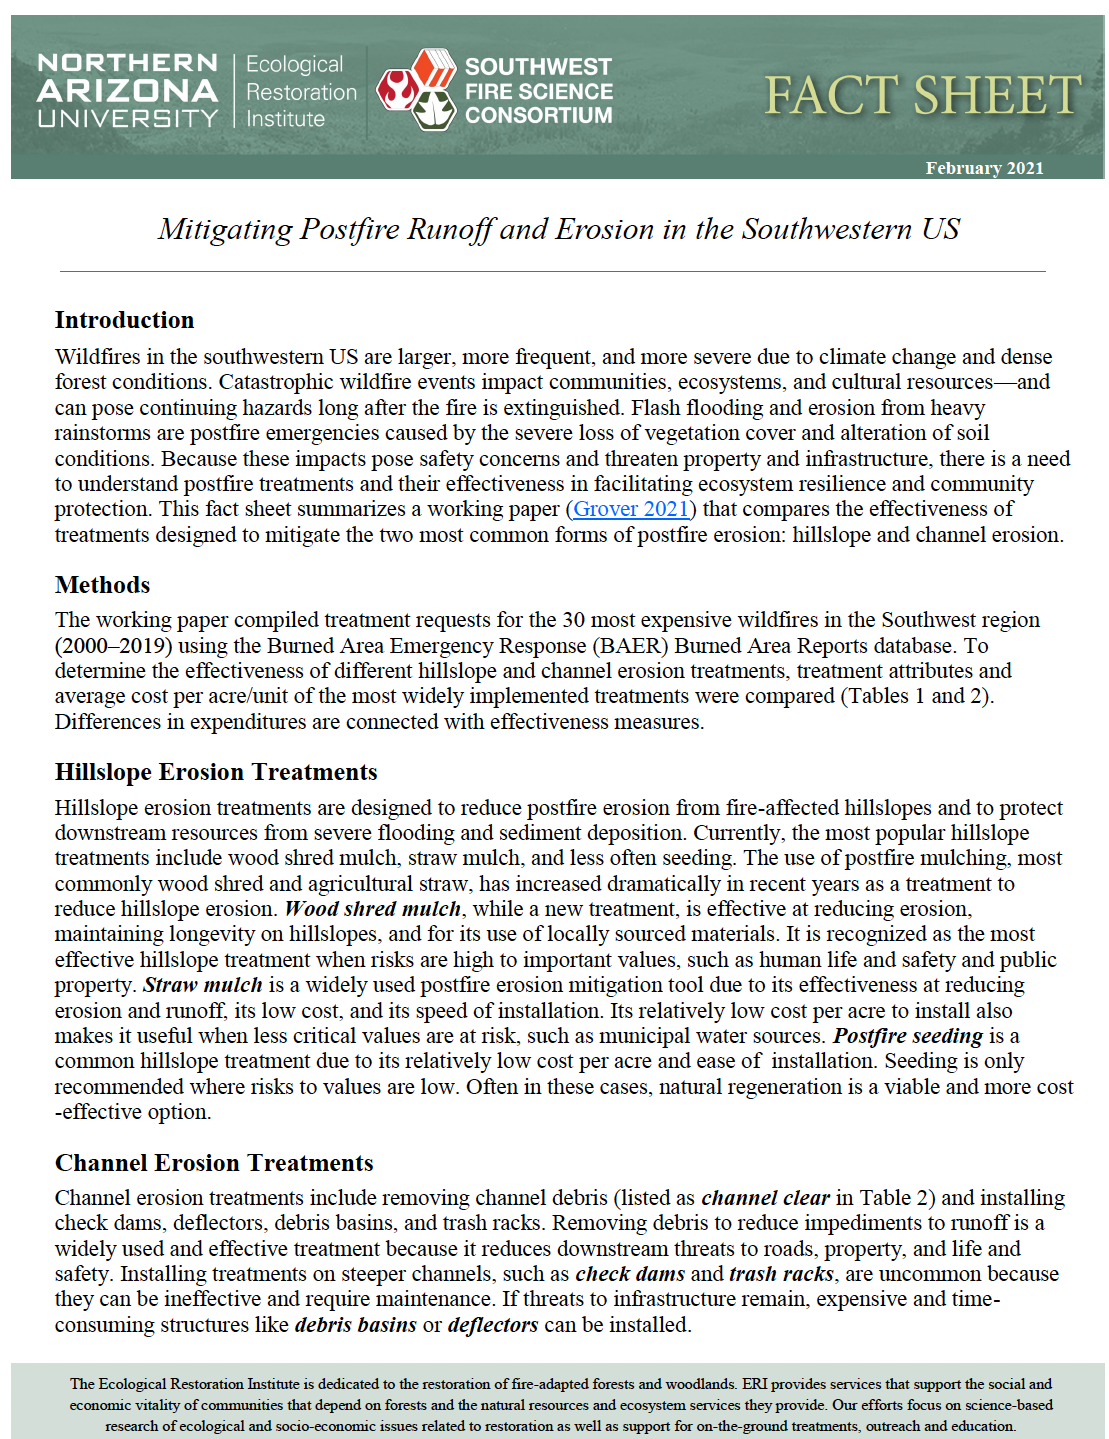 Page 1 of linked "Mitigating Postfire Runoff and Erosion in the Southwestern US" Fact Sheet